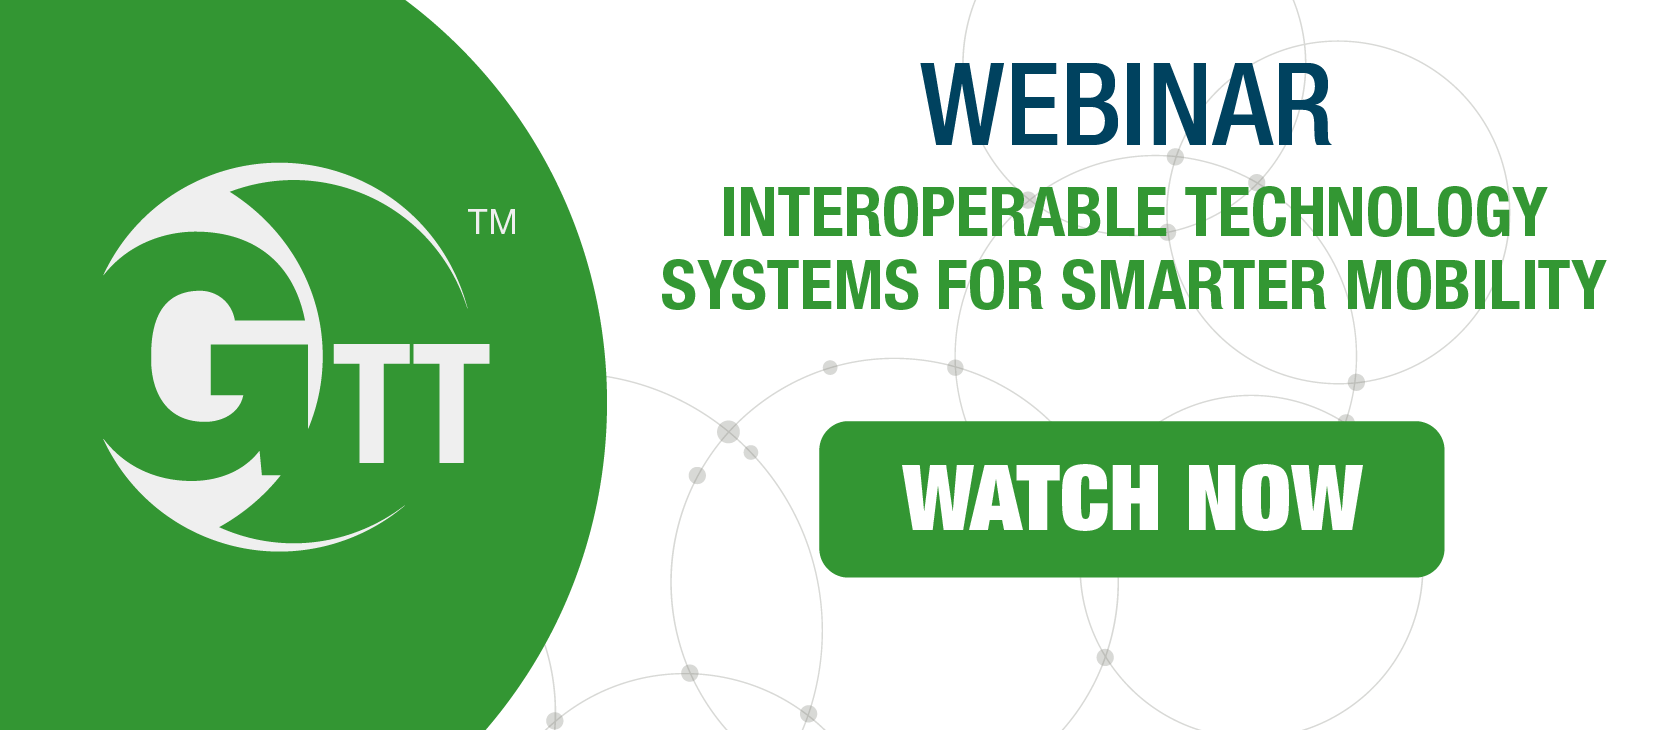 Webinar on Demand: Interoperable Systems for Smarter mobility